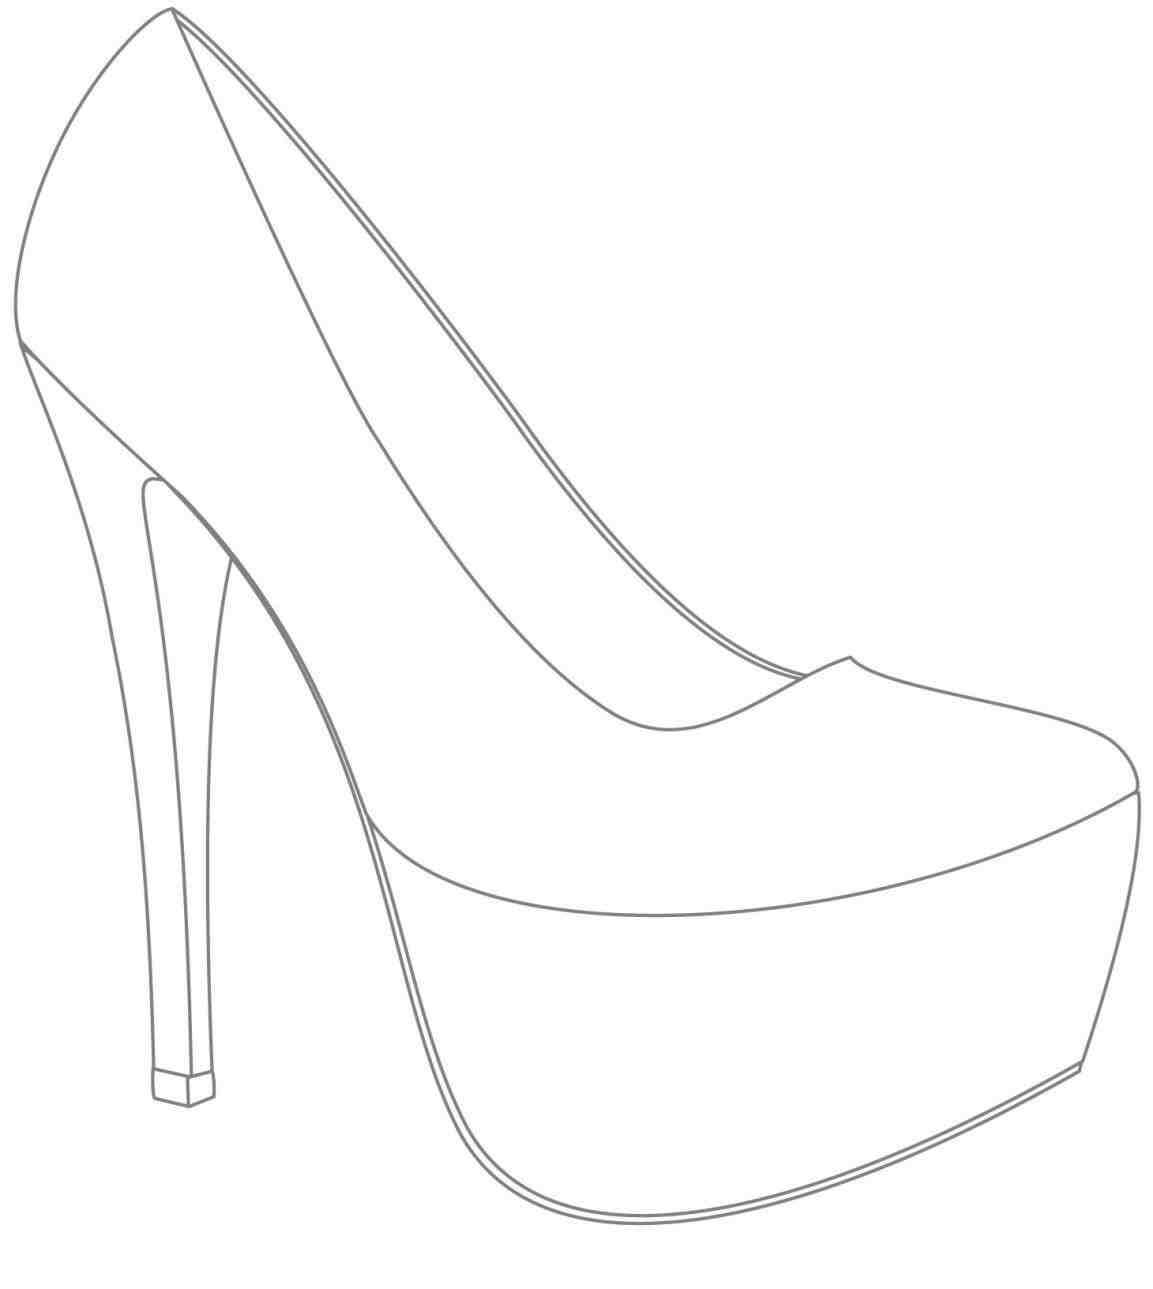 High Heel Drawing Template At Paintingvalley | Explore Inside High Heel Template For Cards